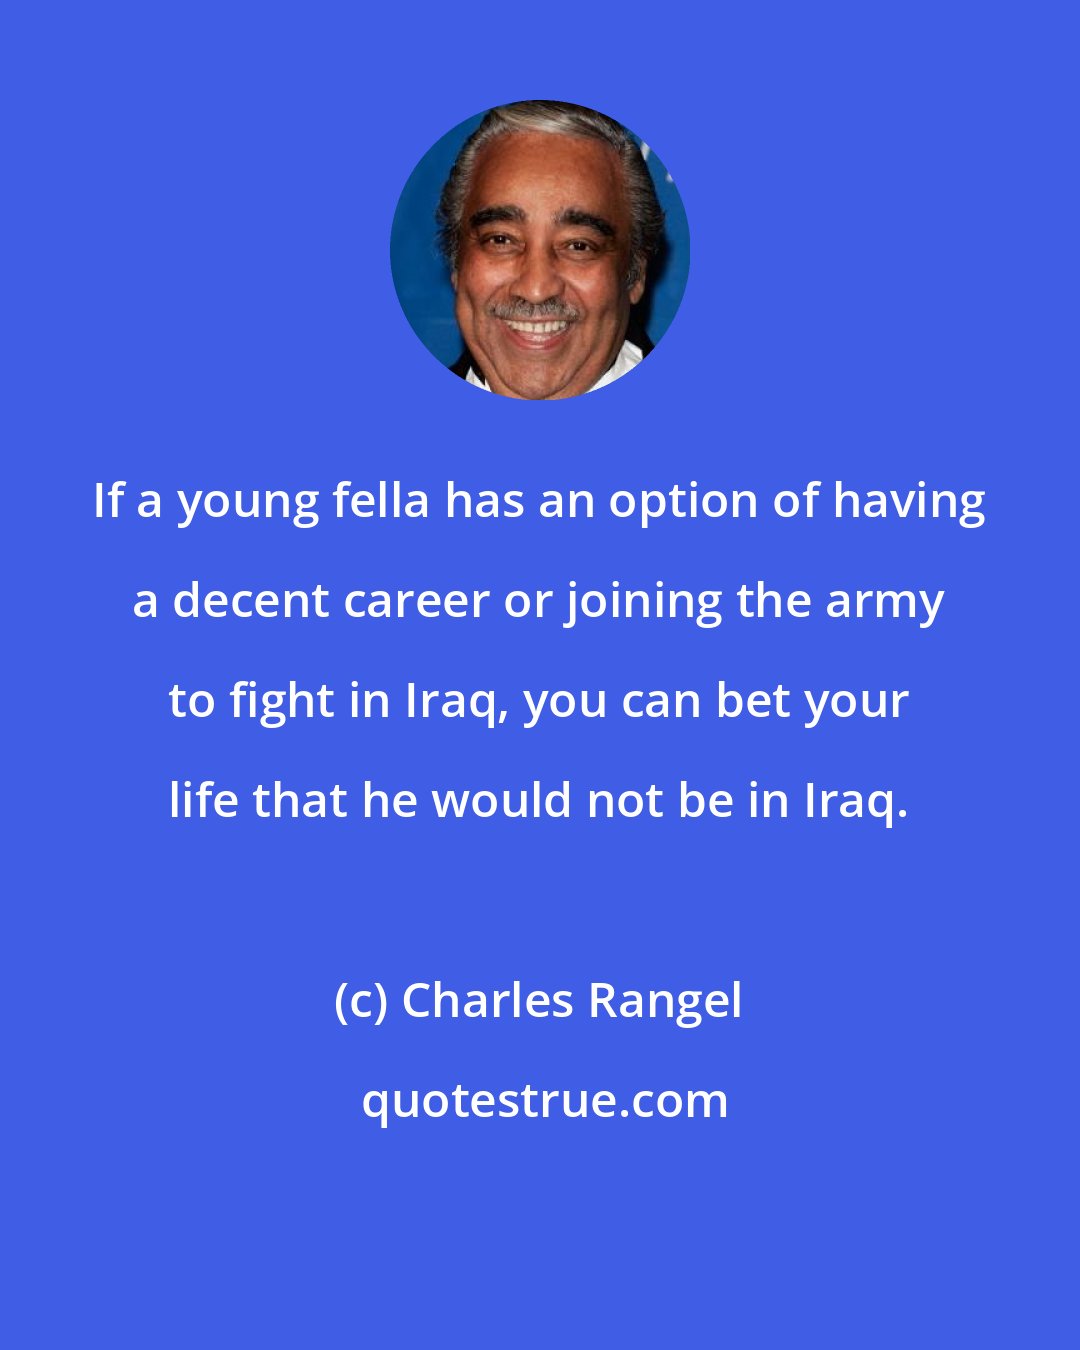 Charles Rangel: If a young fella has an option of having a decent career or joining the army to fight in Iraq, you can bet your life that he would not be in Iraq.